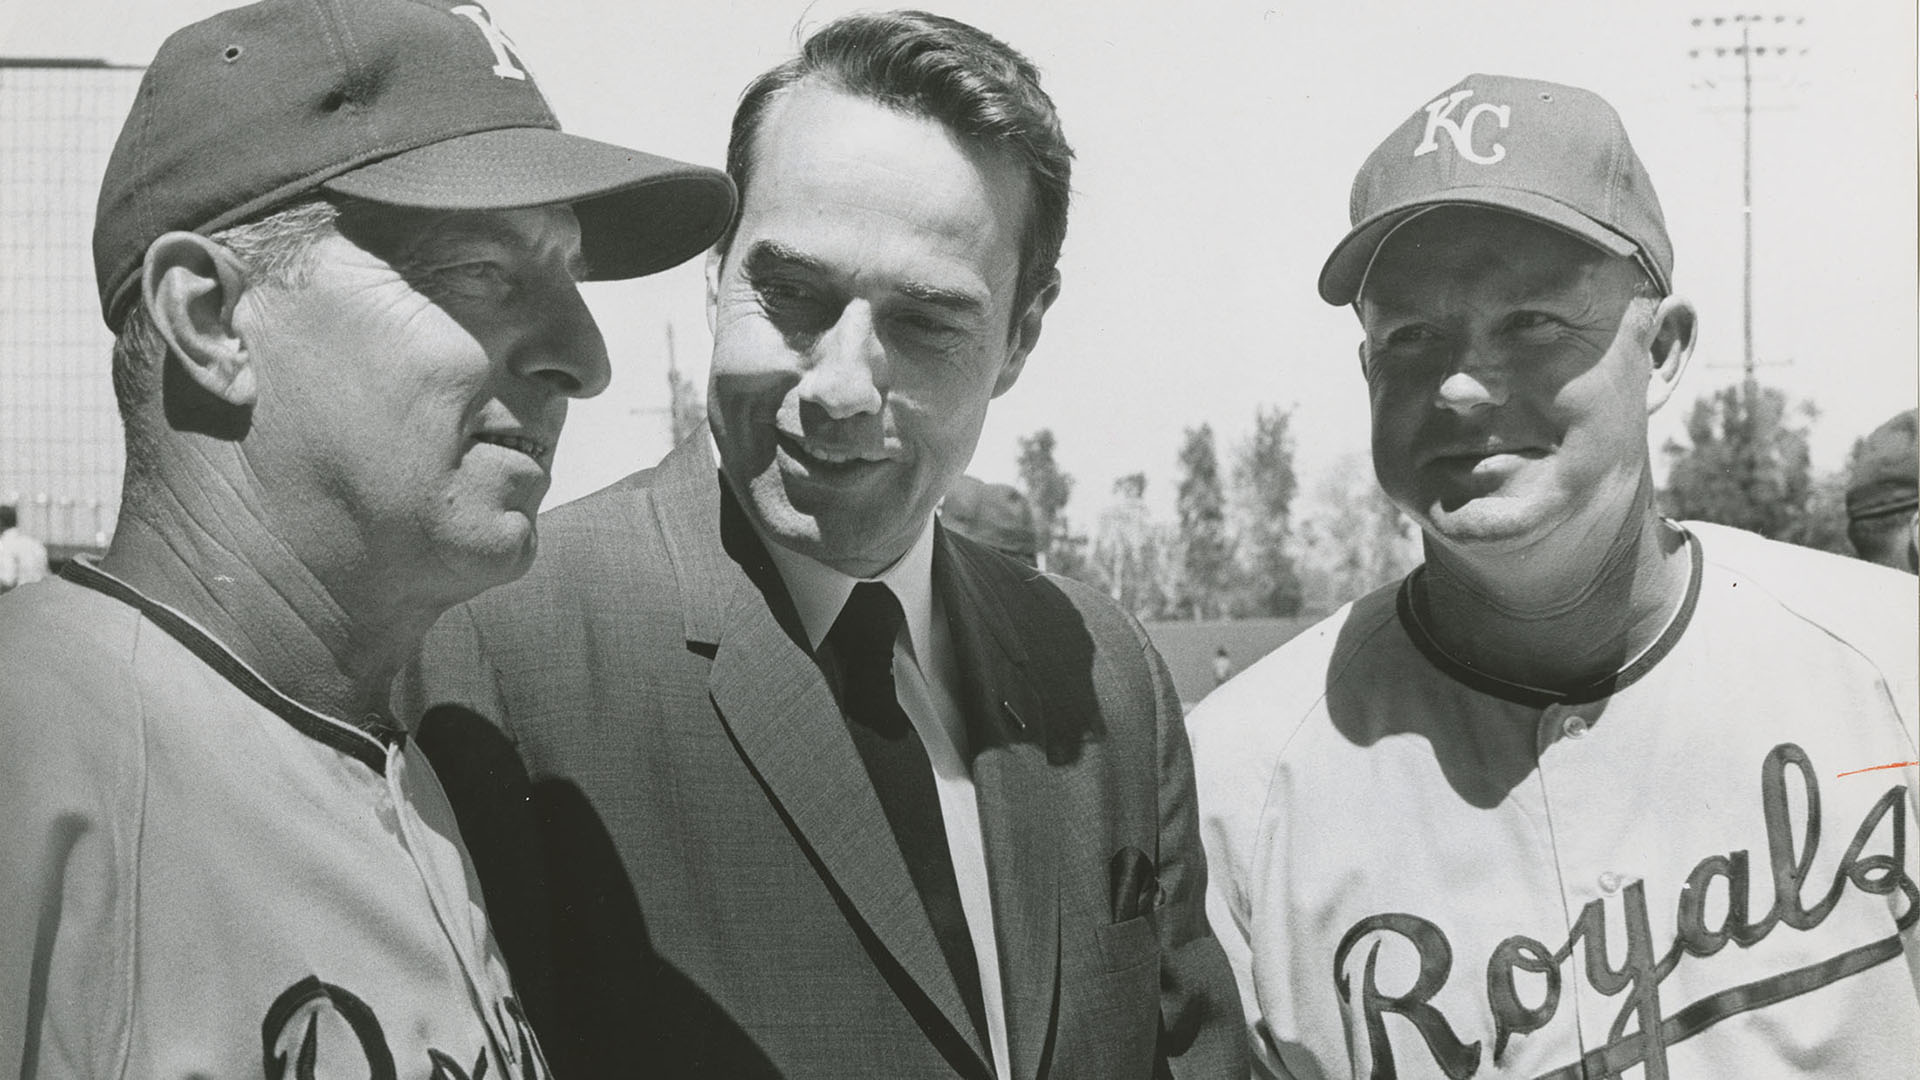 Dole with Royals players